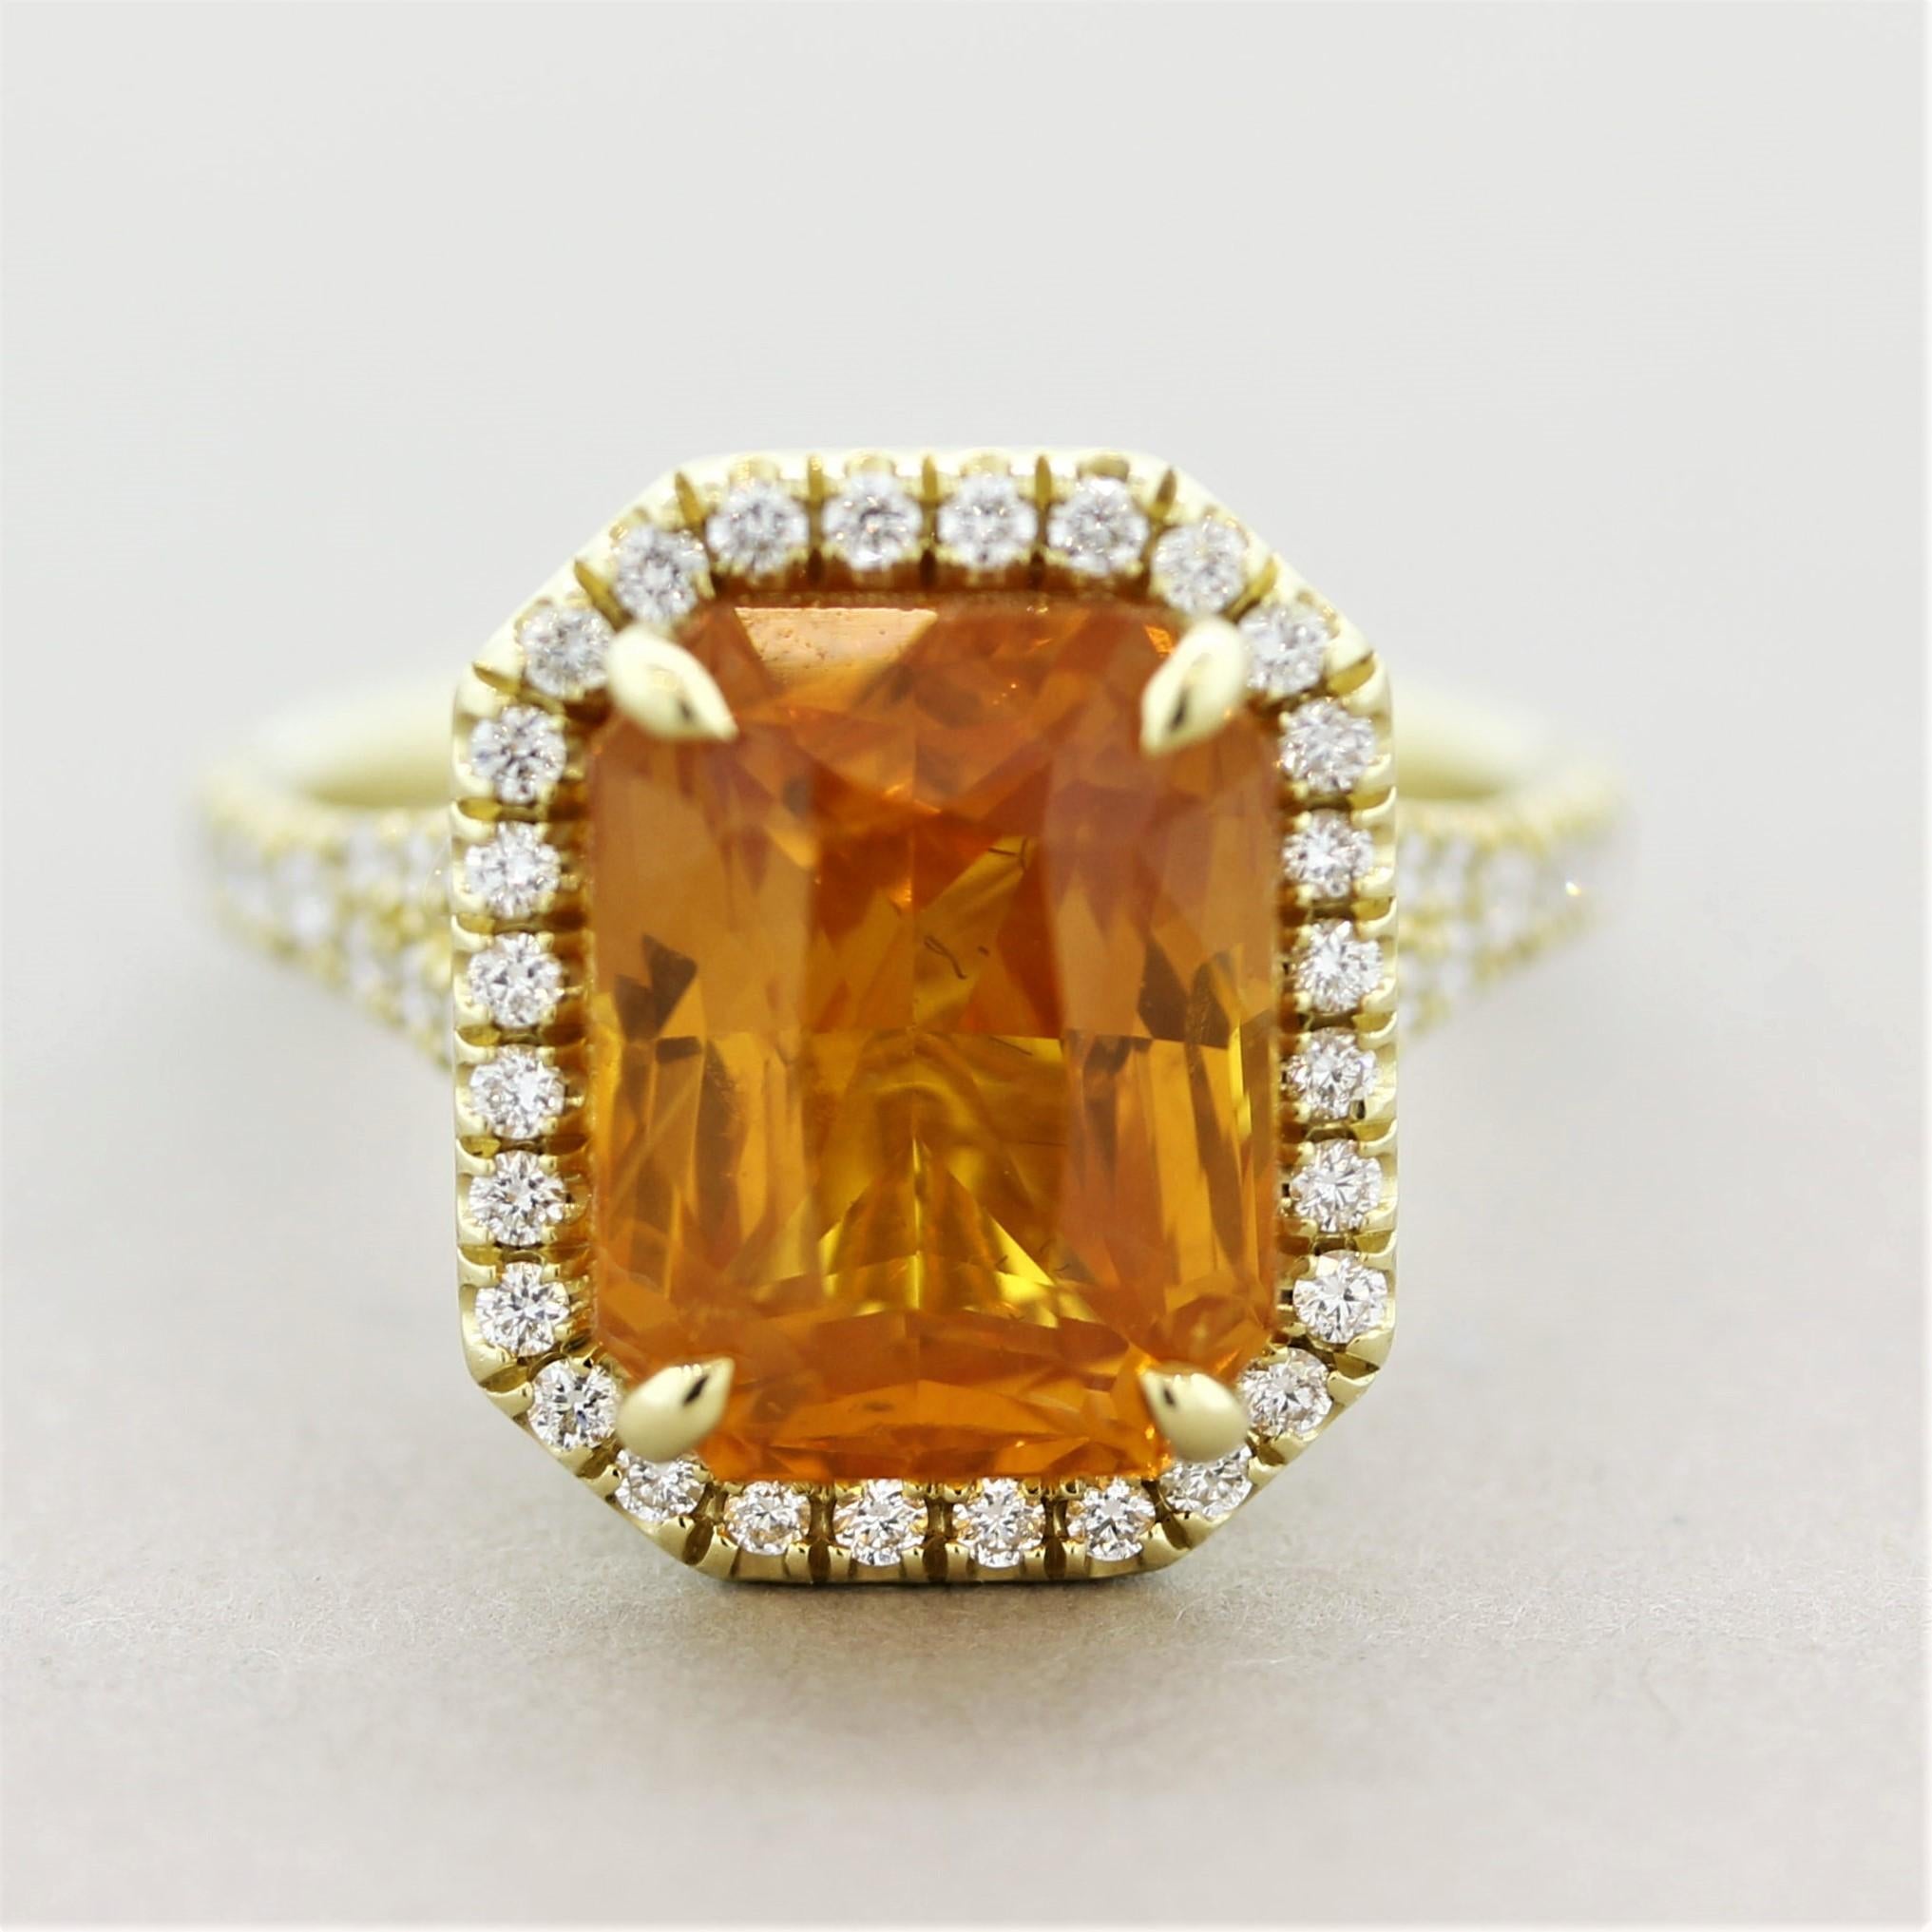 A fanciful ring featuring a 7.97 carat fancy colored sapphire. It has a bright vivid yellowish-orange color and is certified by the GIA as natural. It is accented by 0.50 carats of round brilliant-cut diamonds which halo the sapphire and run down